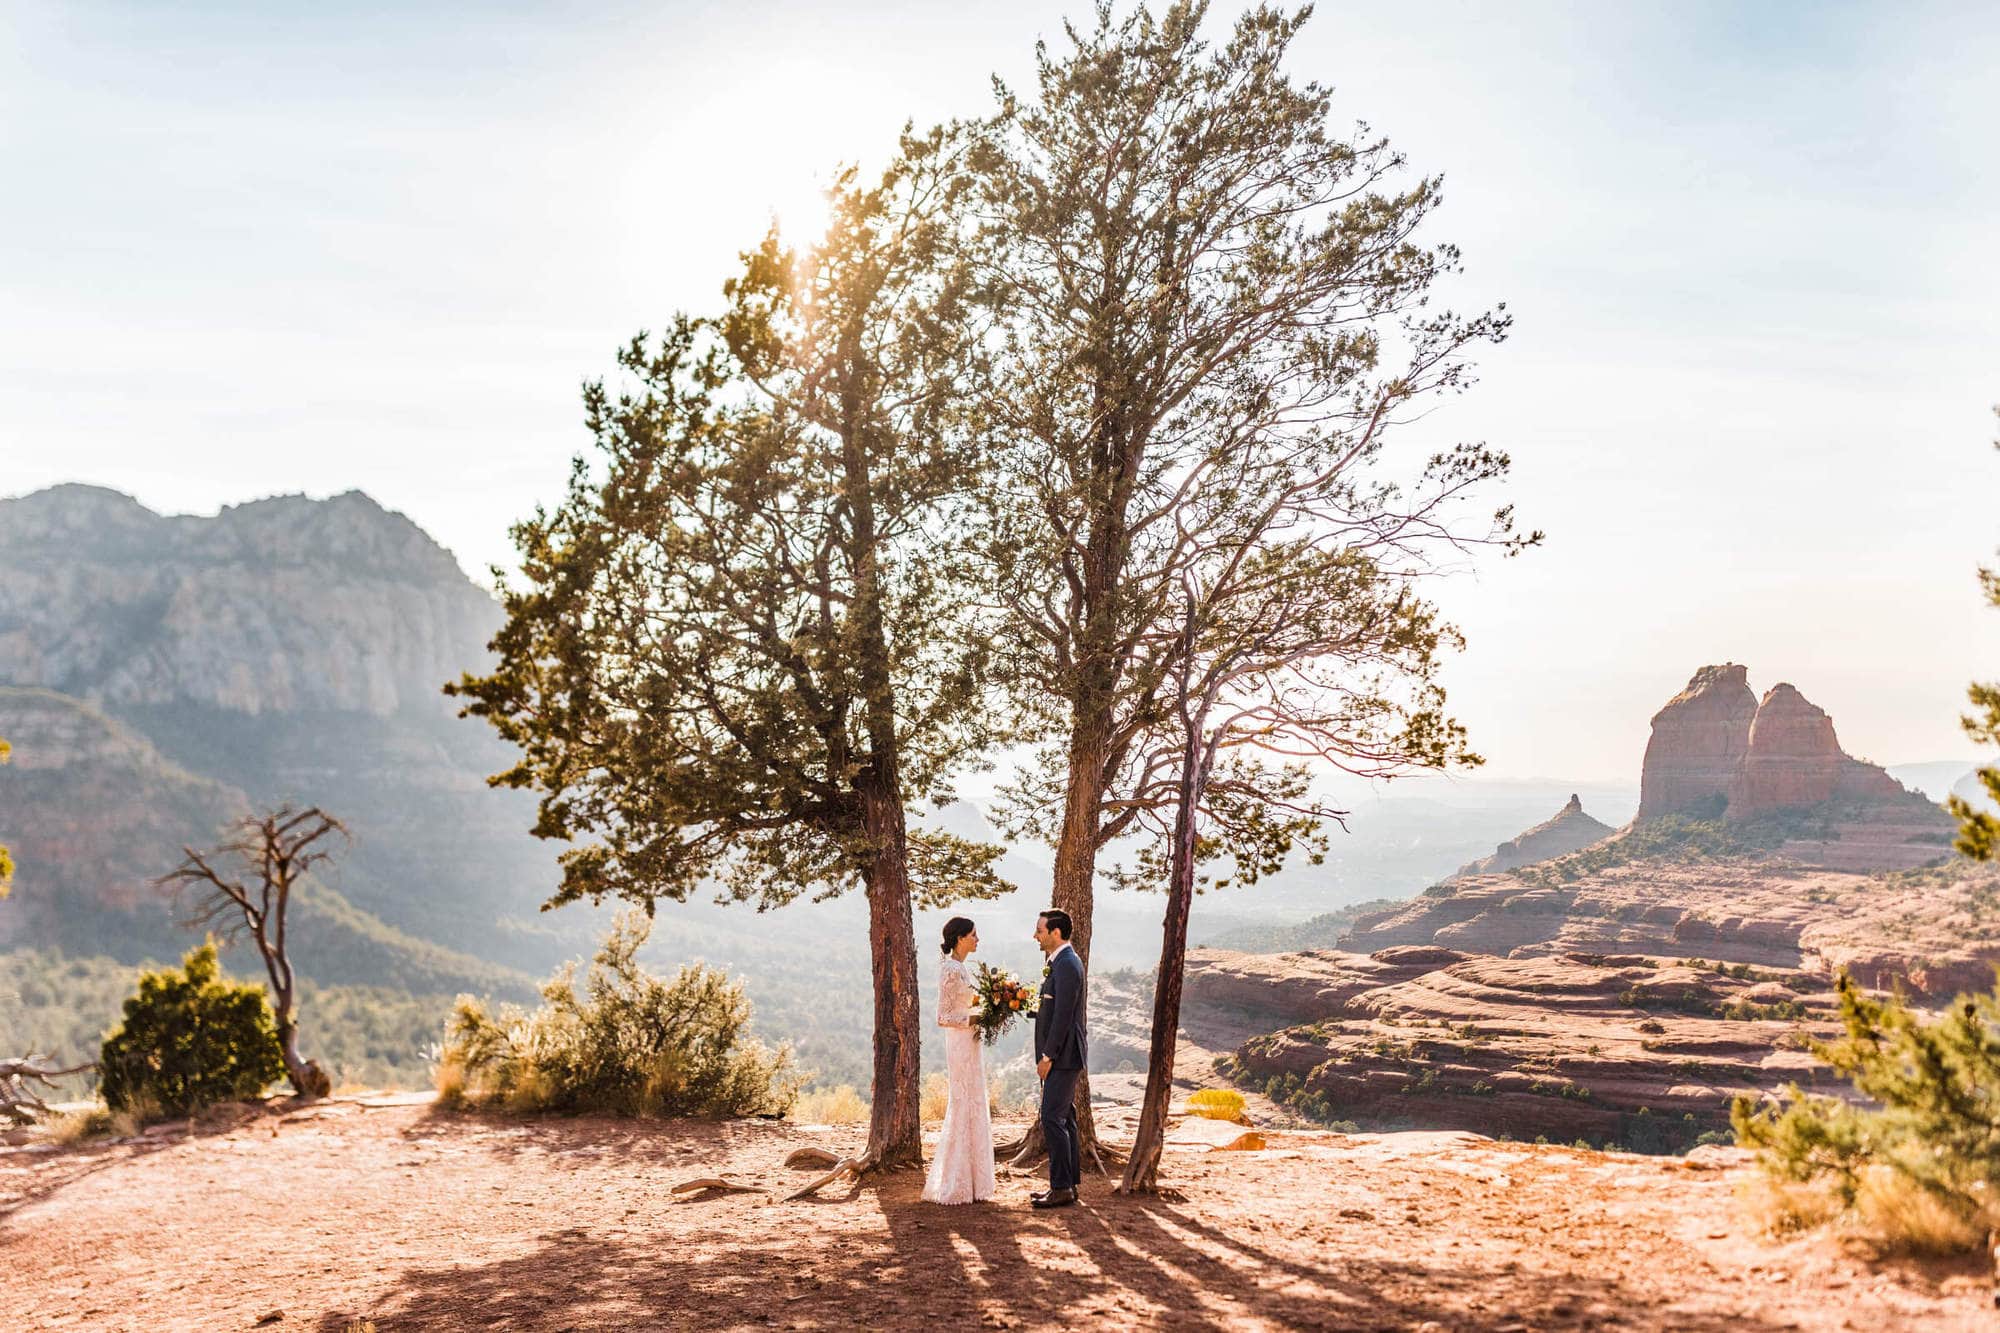 This Sedona adventure elopement was epic! Katy and Clay had the ultimate elopement day adventure jeeping to their wedding spot and dancing the night away!